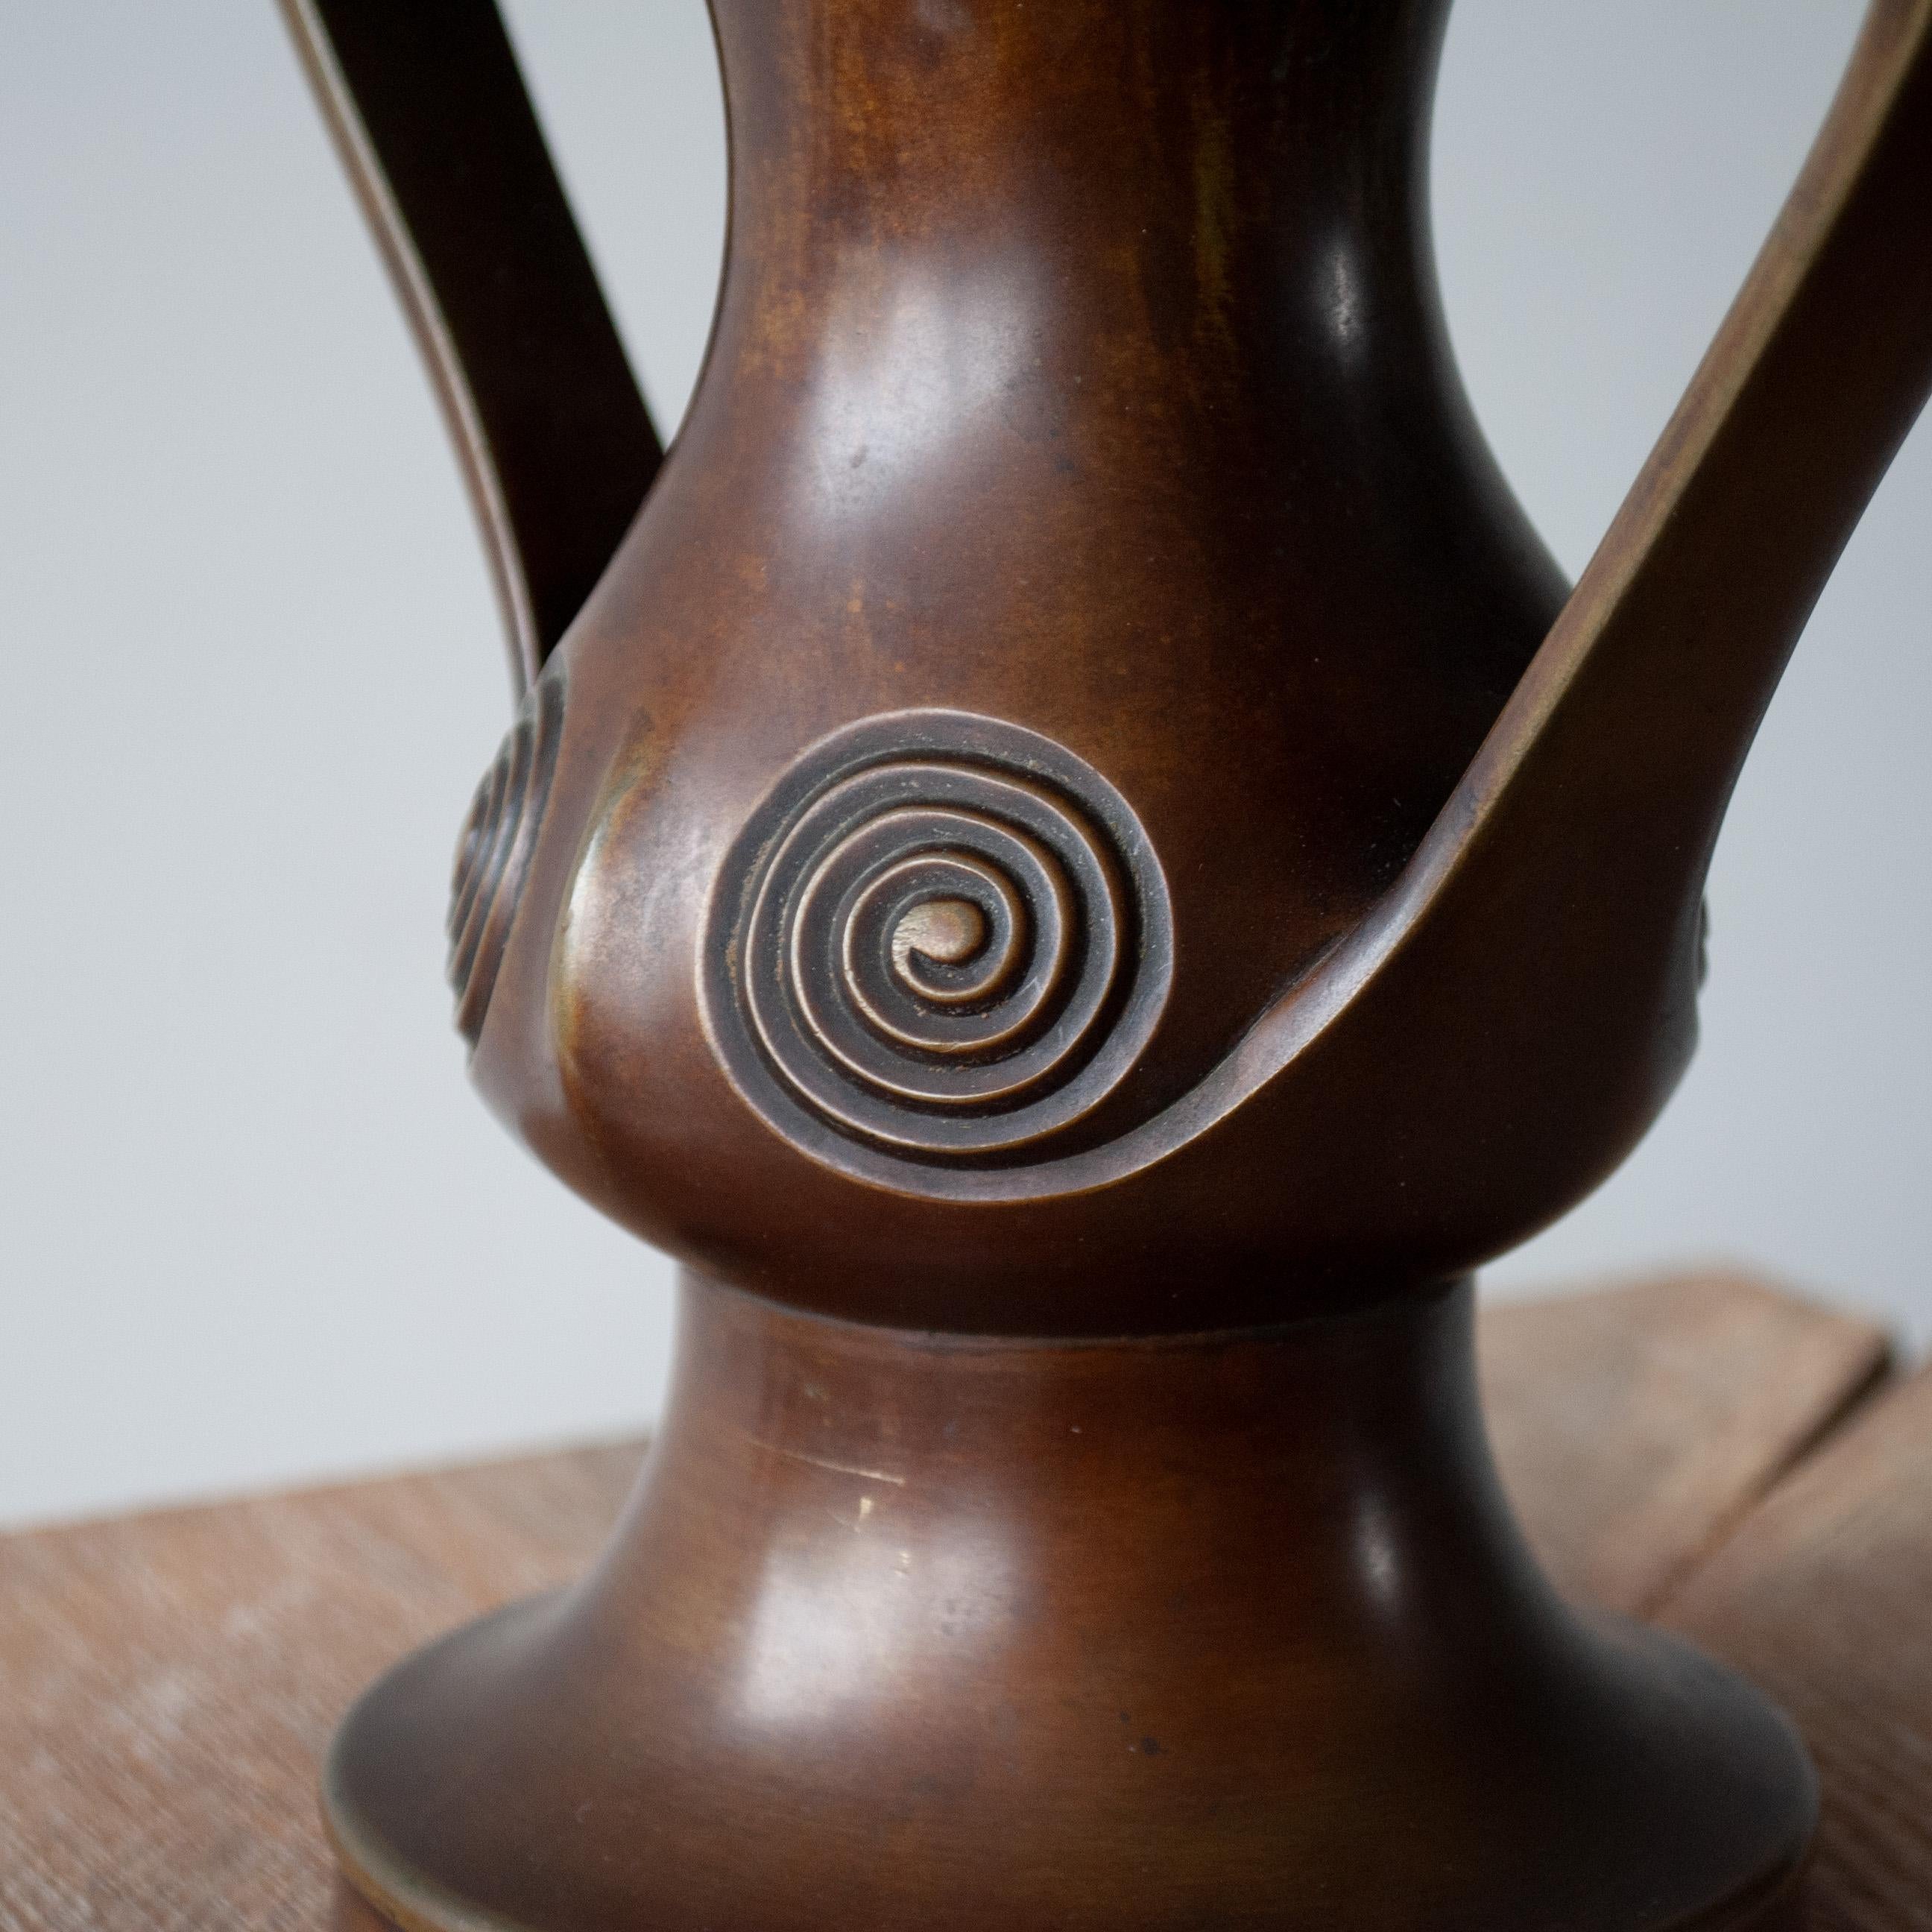 A Japanese solid bronze Mimikuchi handled vase with crisply detailed spiral design on a beautifully rounded body. 
This rare piece dates from the early to mid 1800's. A very fine example of Japanese Edo period design and master-craftsmanship.